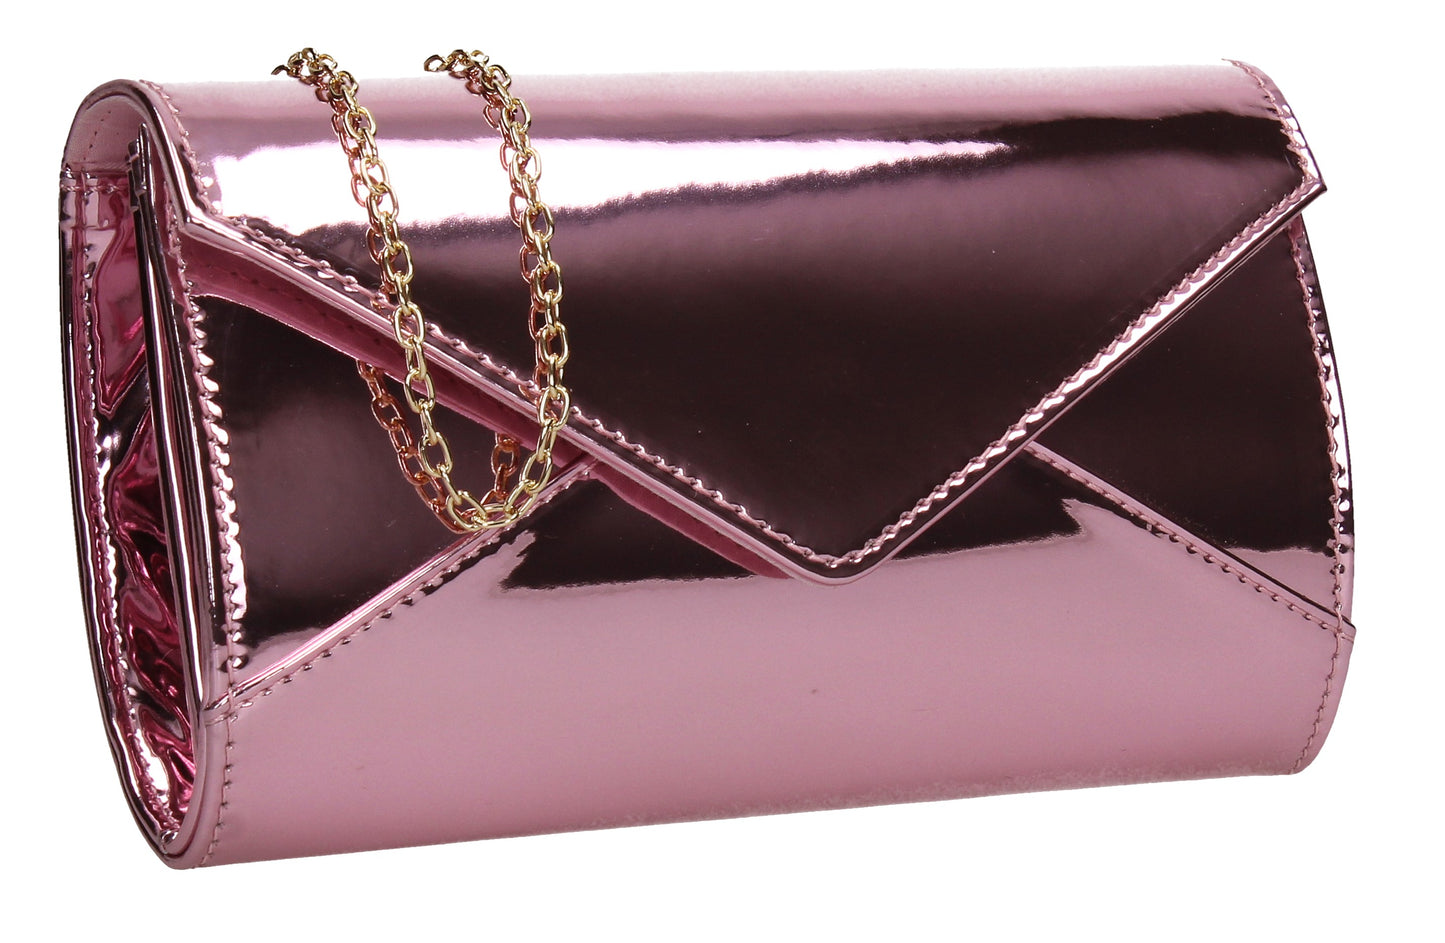 SWANKYSWANS Emely Patent Clutch Bag Pink